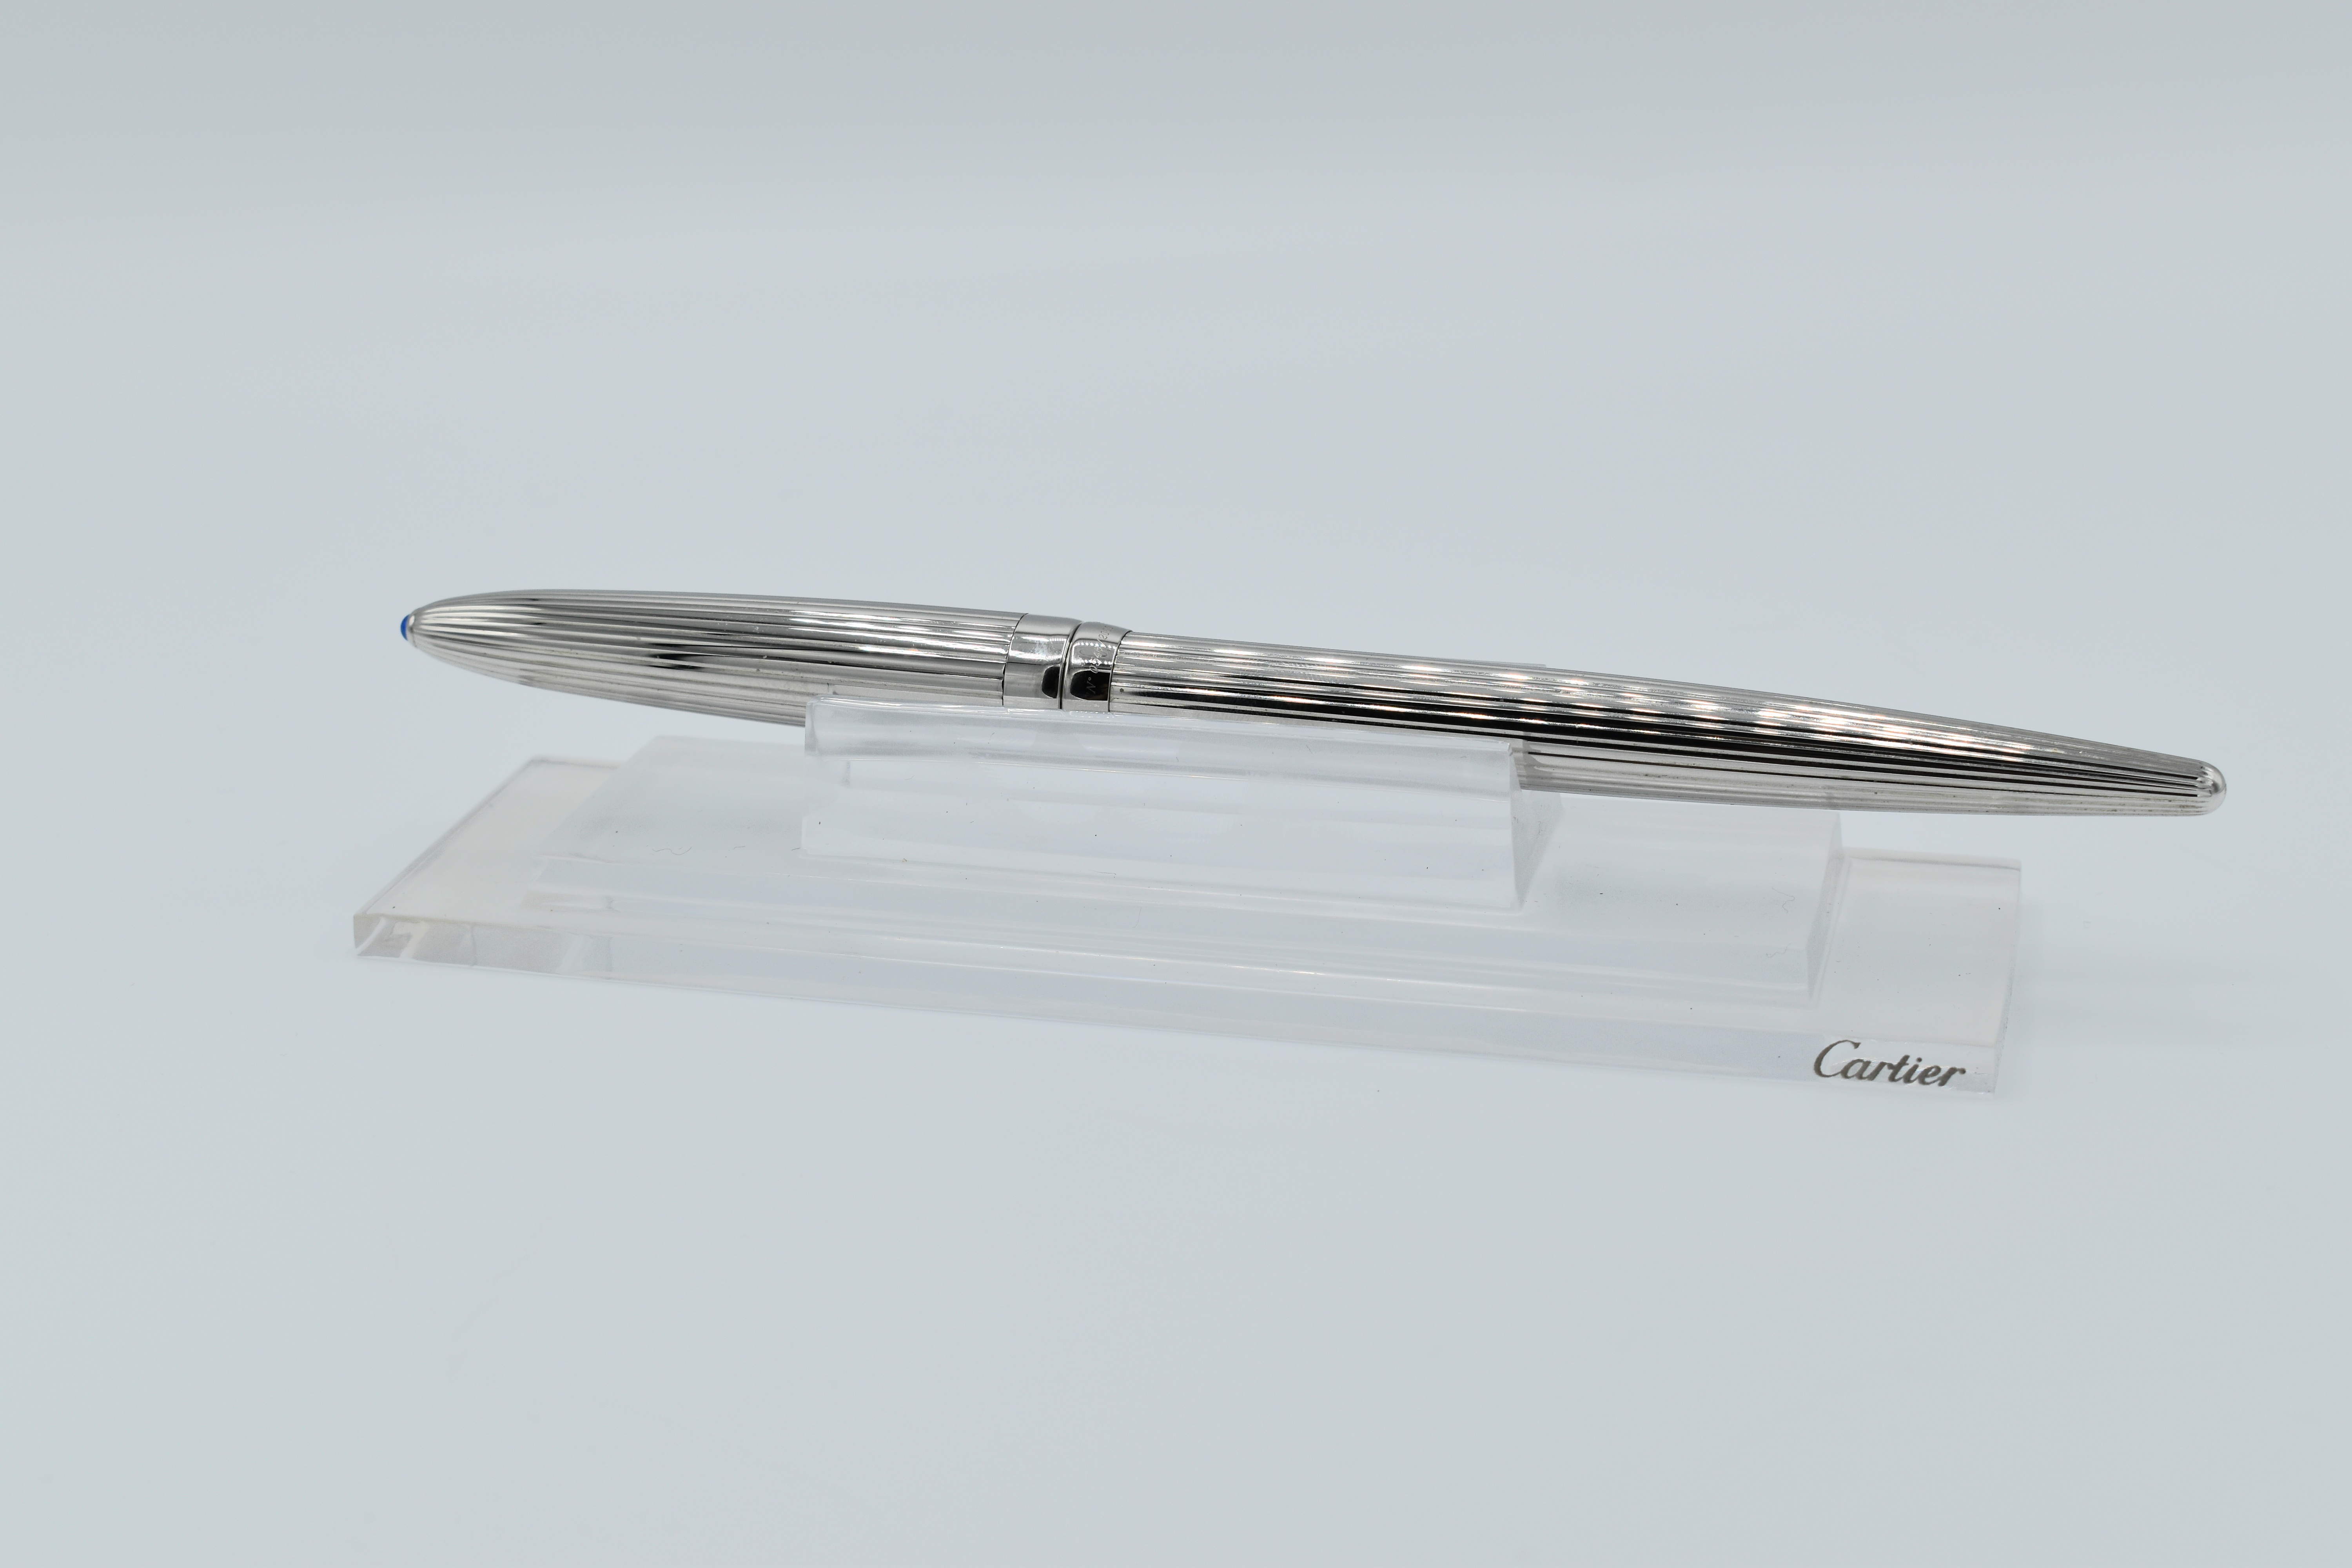 Brand New - Incredibly Rare - Cartier Limited Edition Platinum Calligraphy Fountain Pen - 2001 - Image 4 of 7